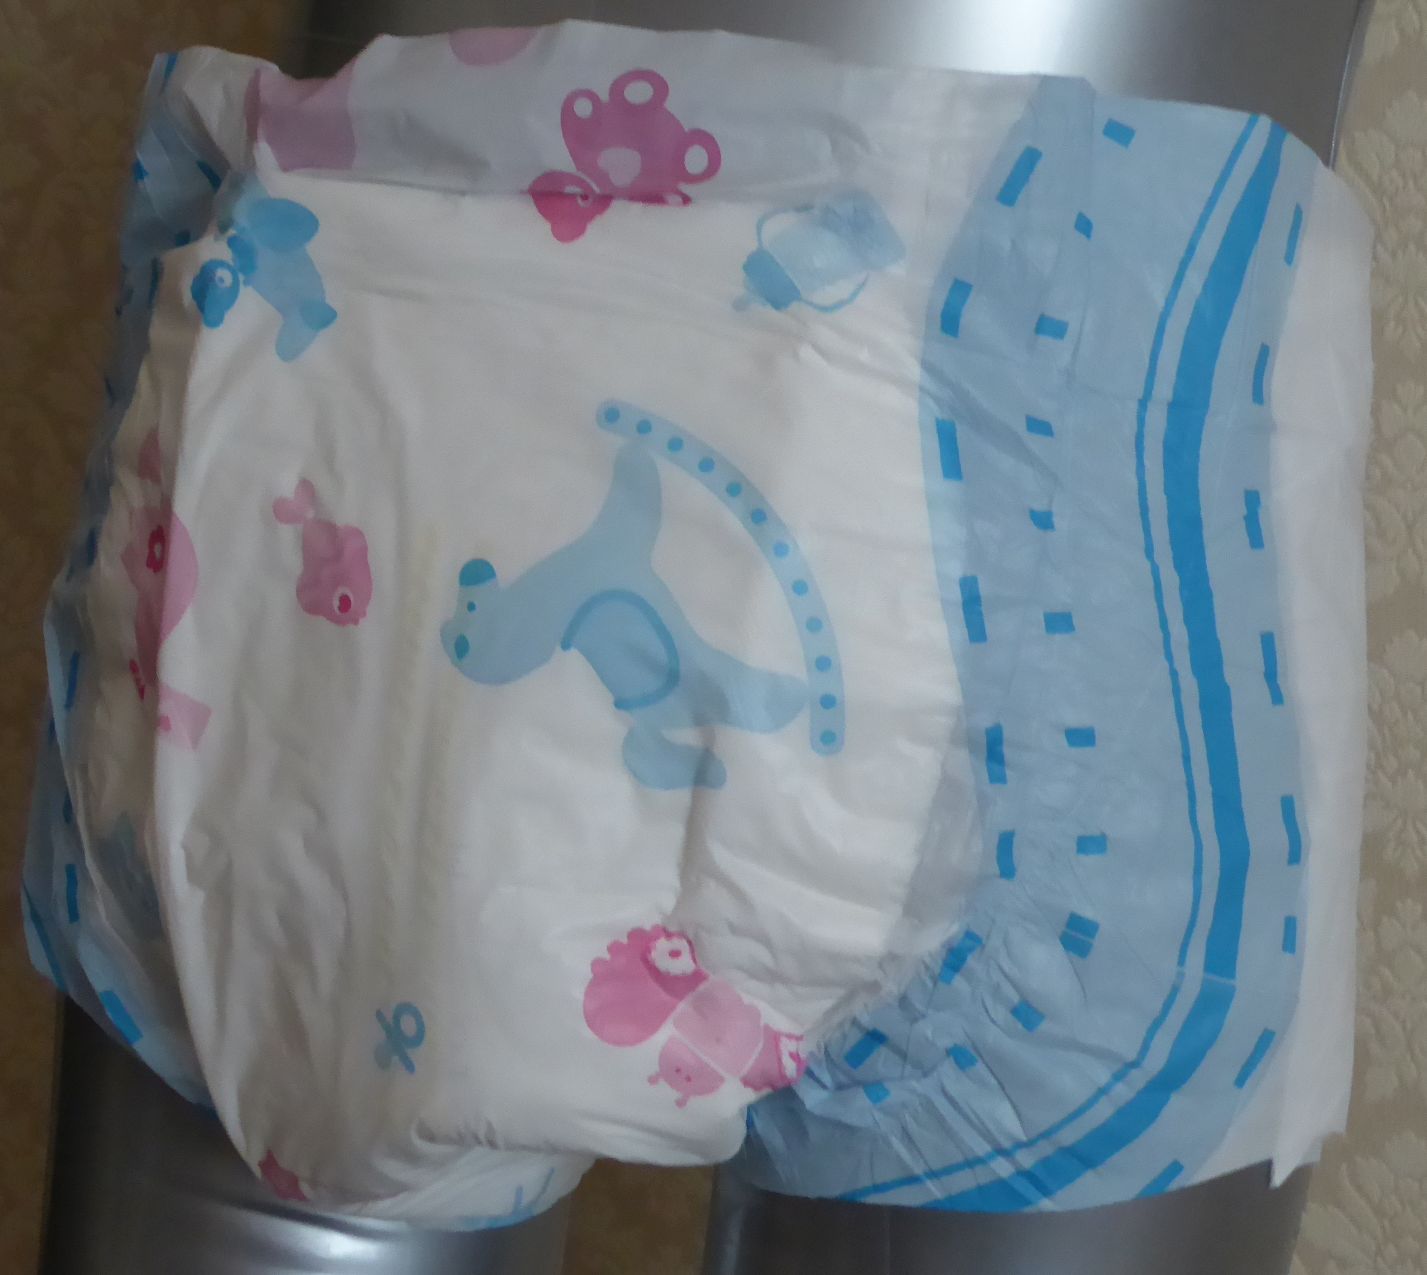 NURSERY DECORATED nighttime nappies (diapers)